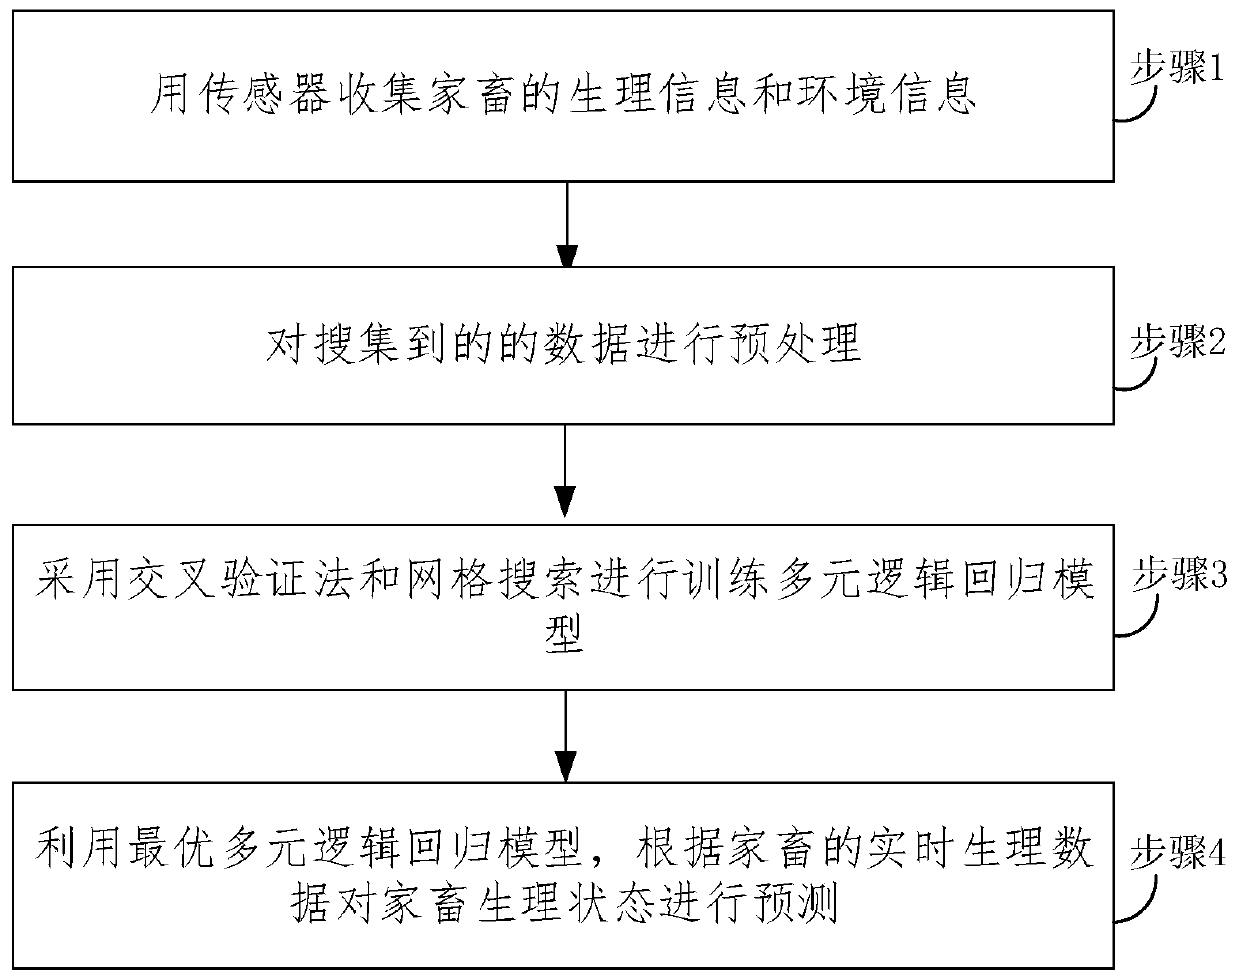 Livestock physiological status prediction method and system based on a multivariate logistic regression model